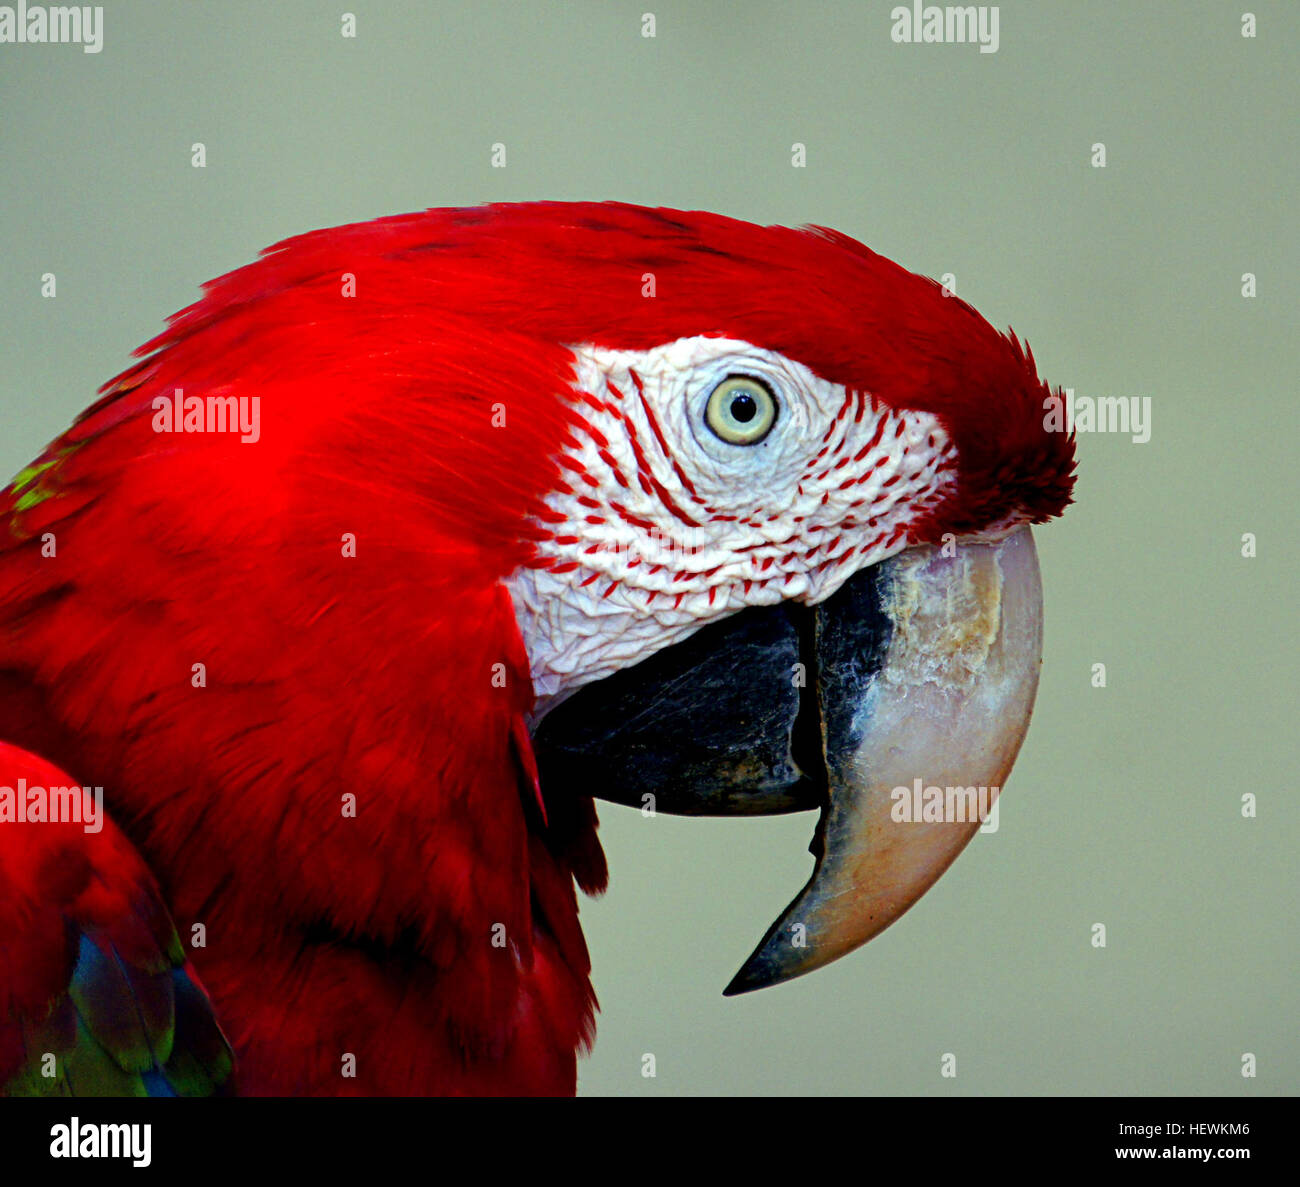 Many macaws have vibrant plumage. The coloring is suited to life in Central and South American rain forests, with their green canopies and colorful fruits and flowers. The birds boast large, powerful beaks that easily crack nuts and seeds, while their dry, scaly tongues have a bone inside them that makes them an effective tool for tapping into fruits Stock Photo